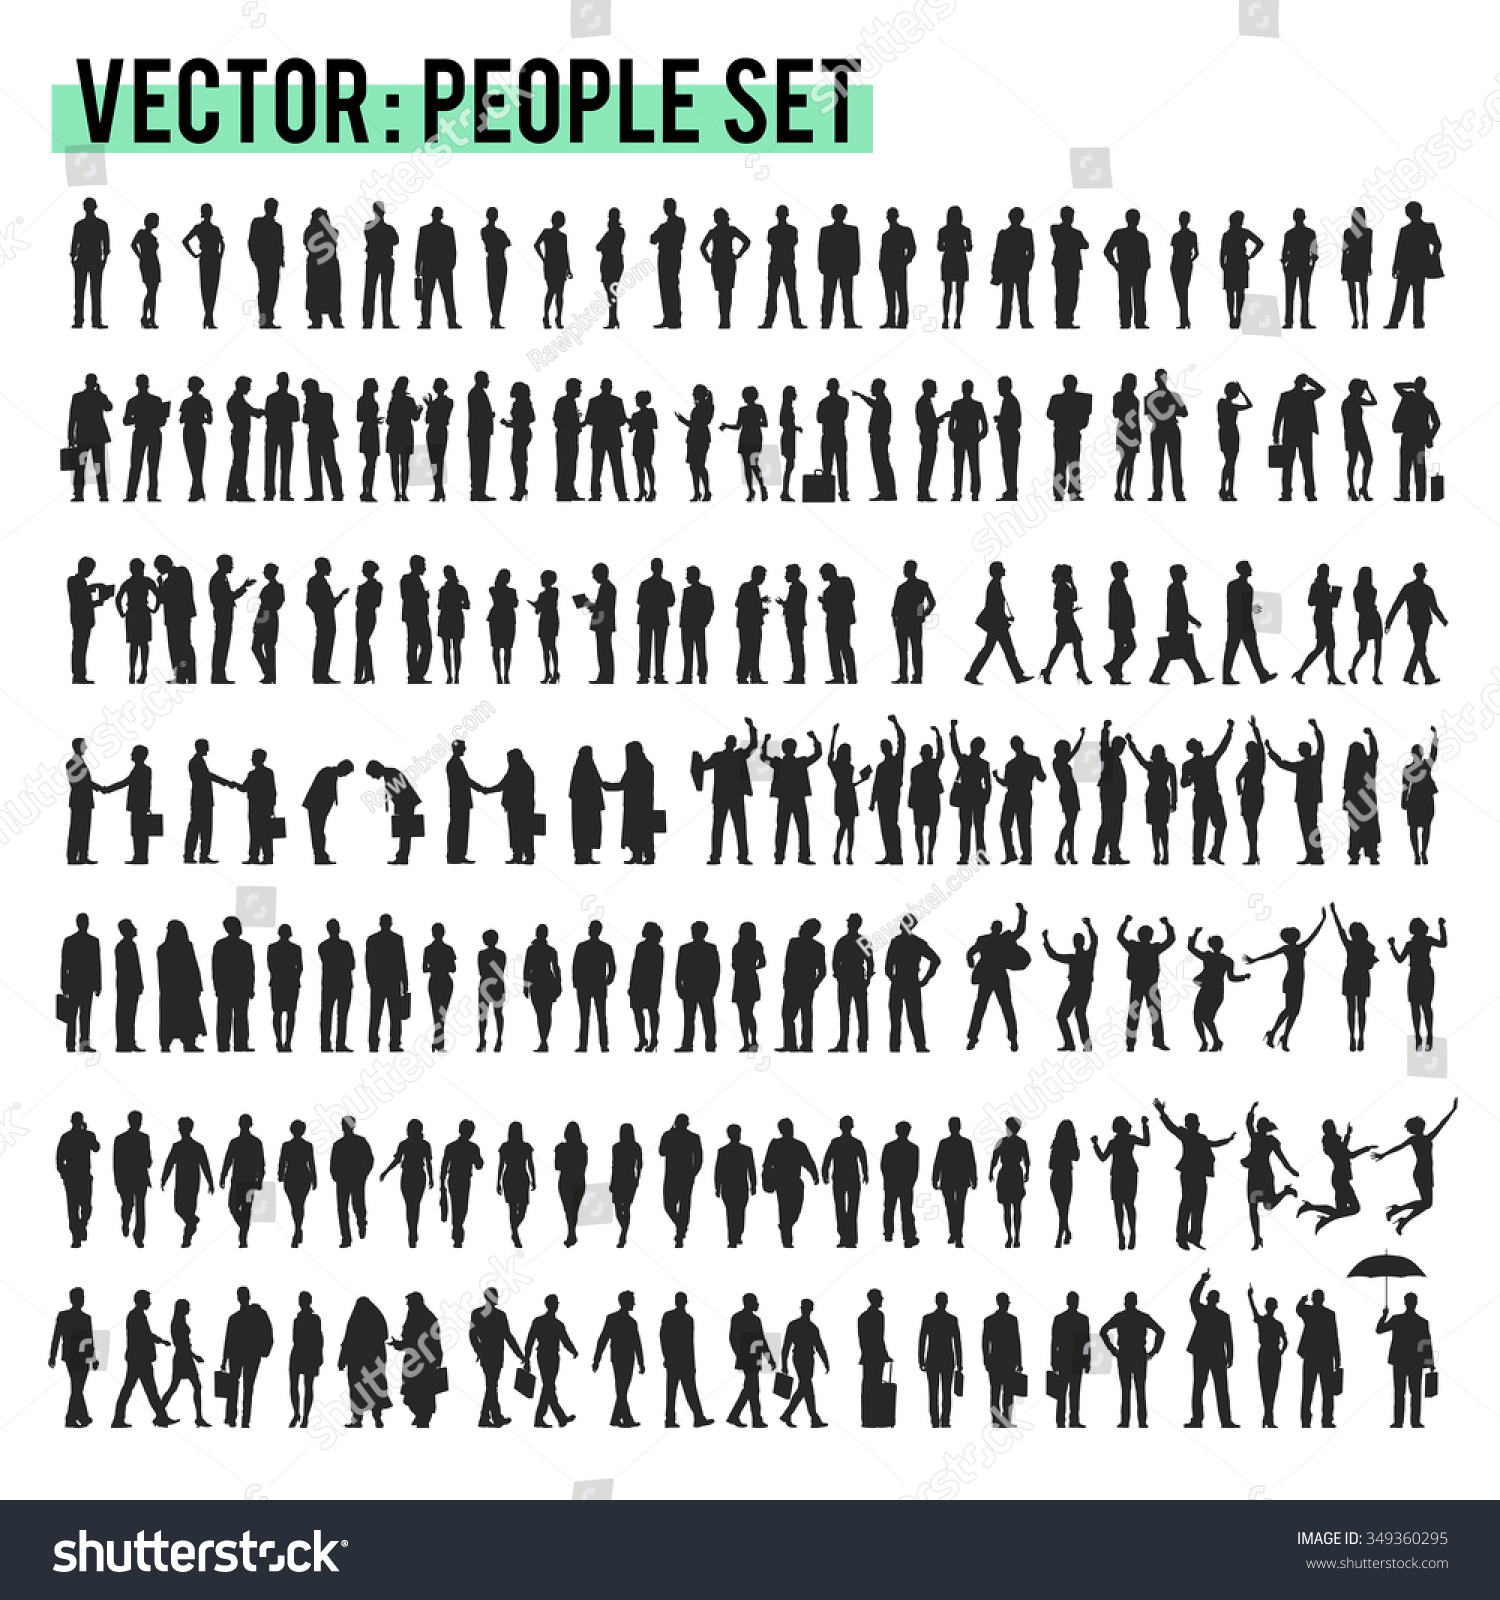 Vector Business People Corporate Company Concept #349360295